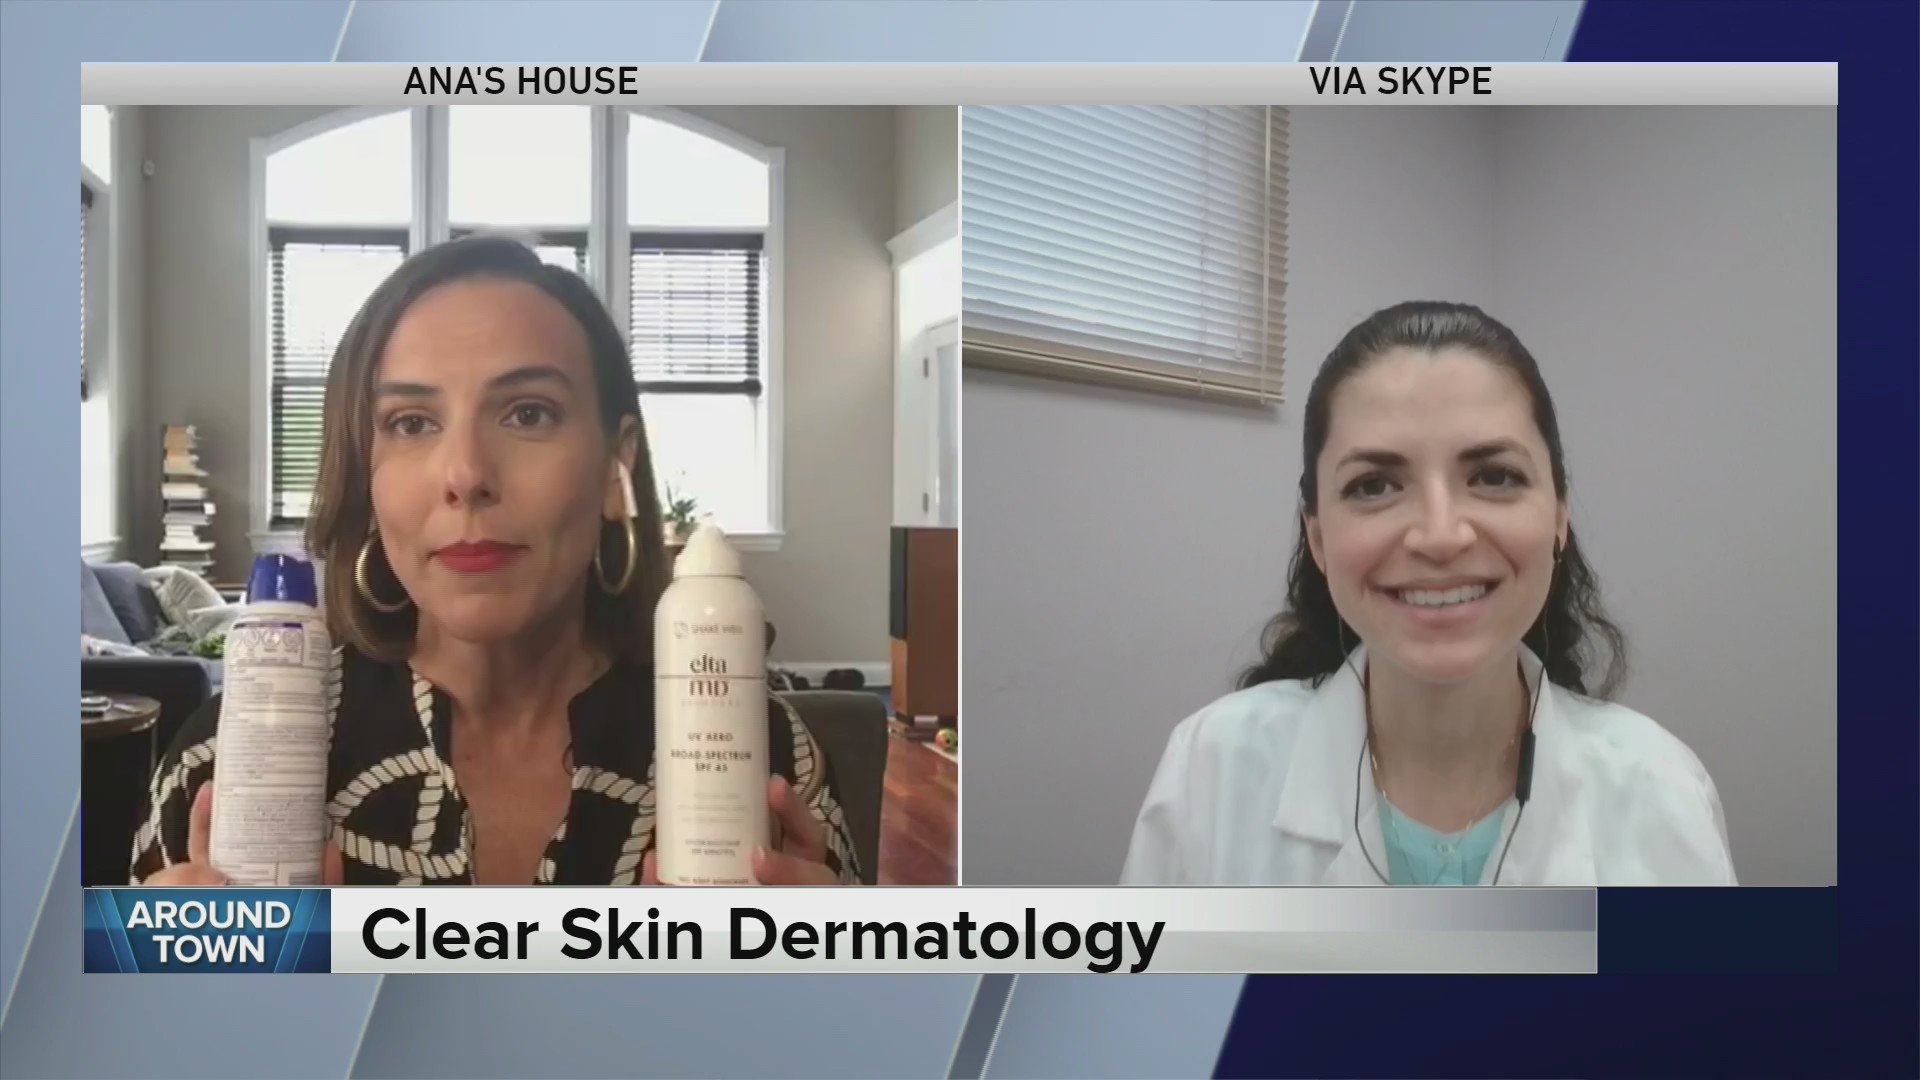 Around ‘The House’ gives tips on sunblock and how to help your skin after wearing masks all day